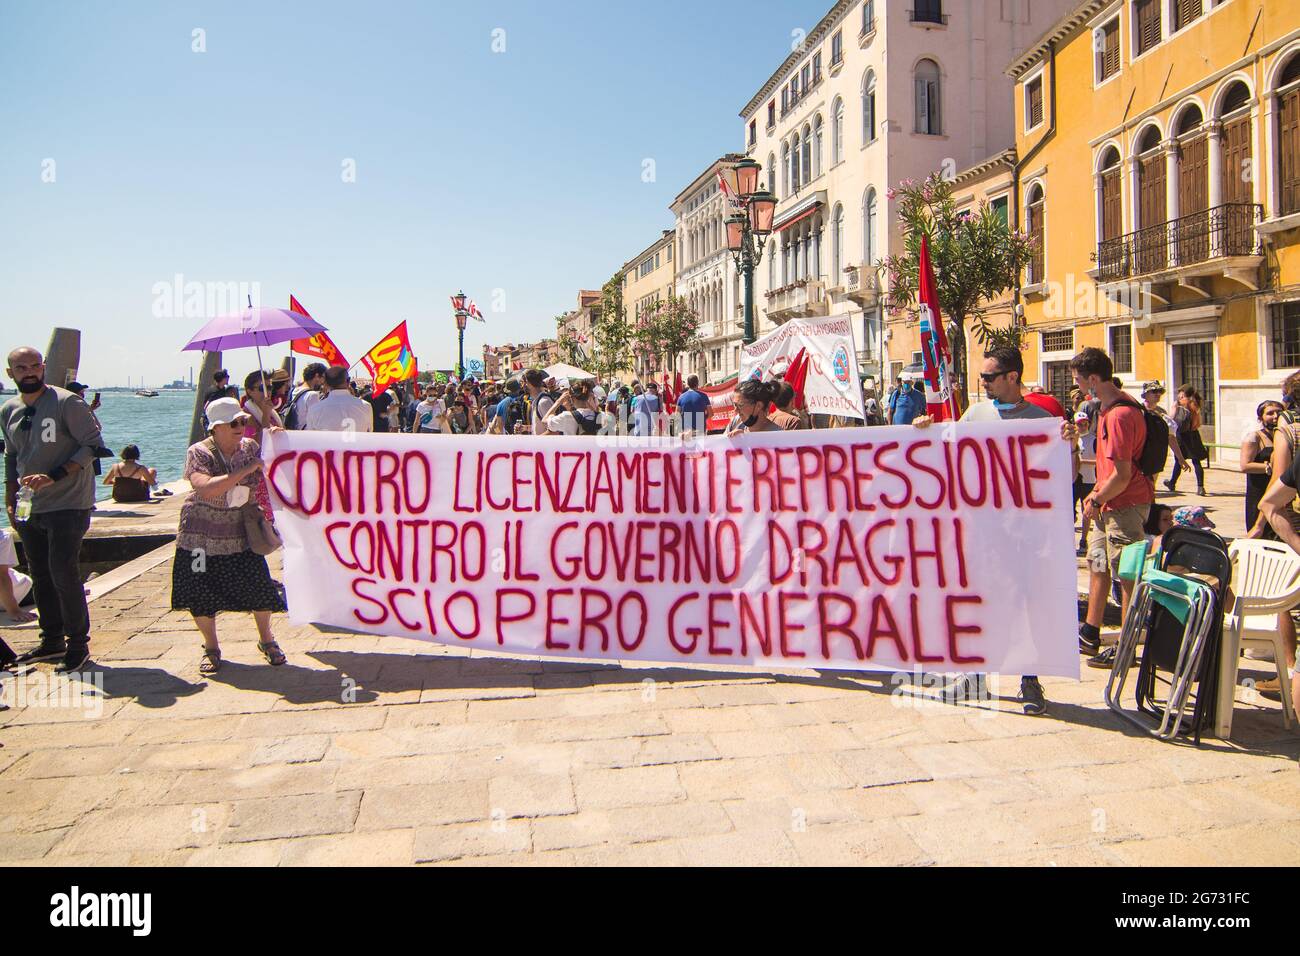 Venice, Italy. 10th July, 2021. Protestors at the demonstration 'We are the tide, you are only (G)20' on July 10, 2021 in Venice, Italy. For their third meeting under the Italian G20 presidency, on 9 and 10 July 2021, G20 Finance Ministers and Central Bank Governors (FMCBG) gathered in Venice for a two-day summit on issues related to global economy and health © Simone Padovani / Awakening / Alamy Live News Stock Photo